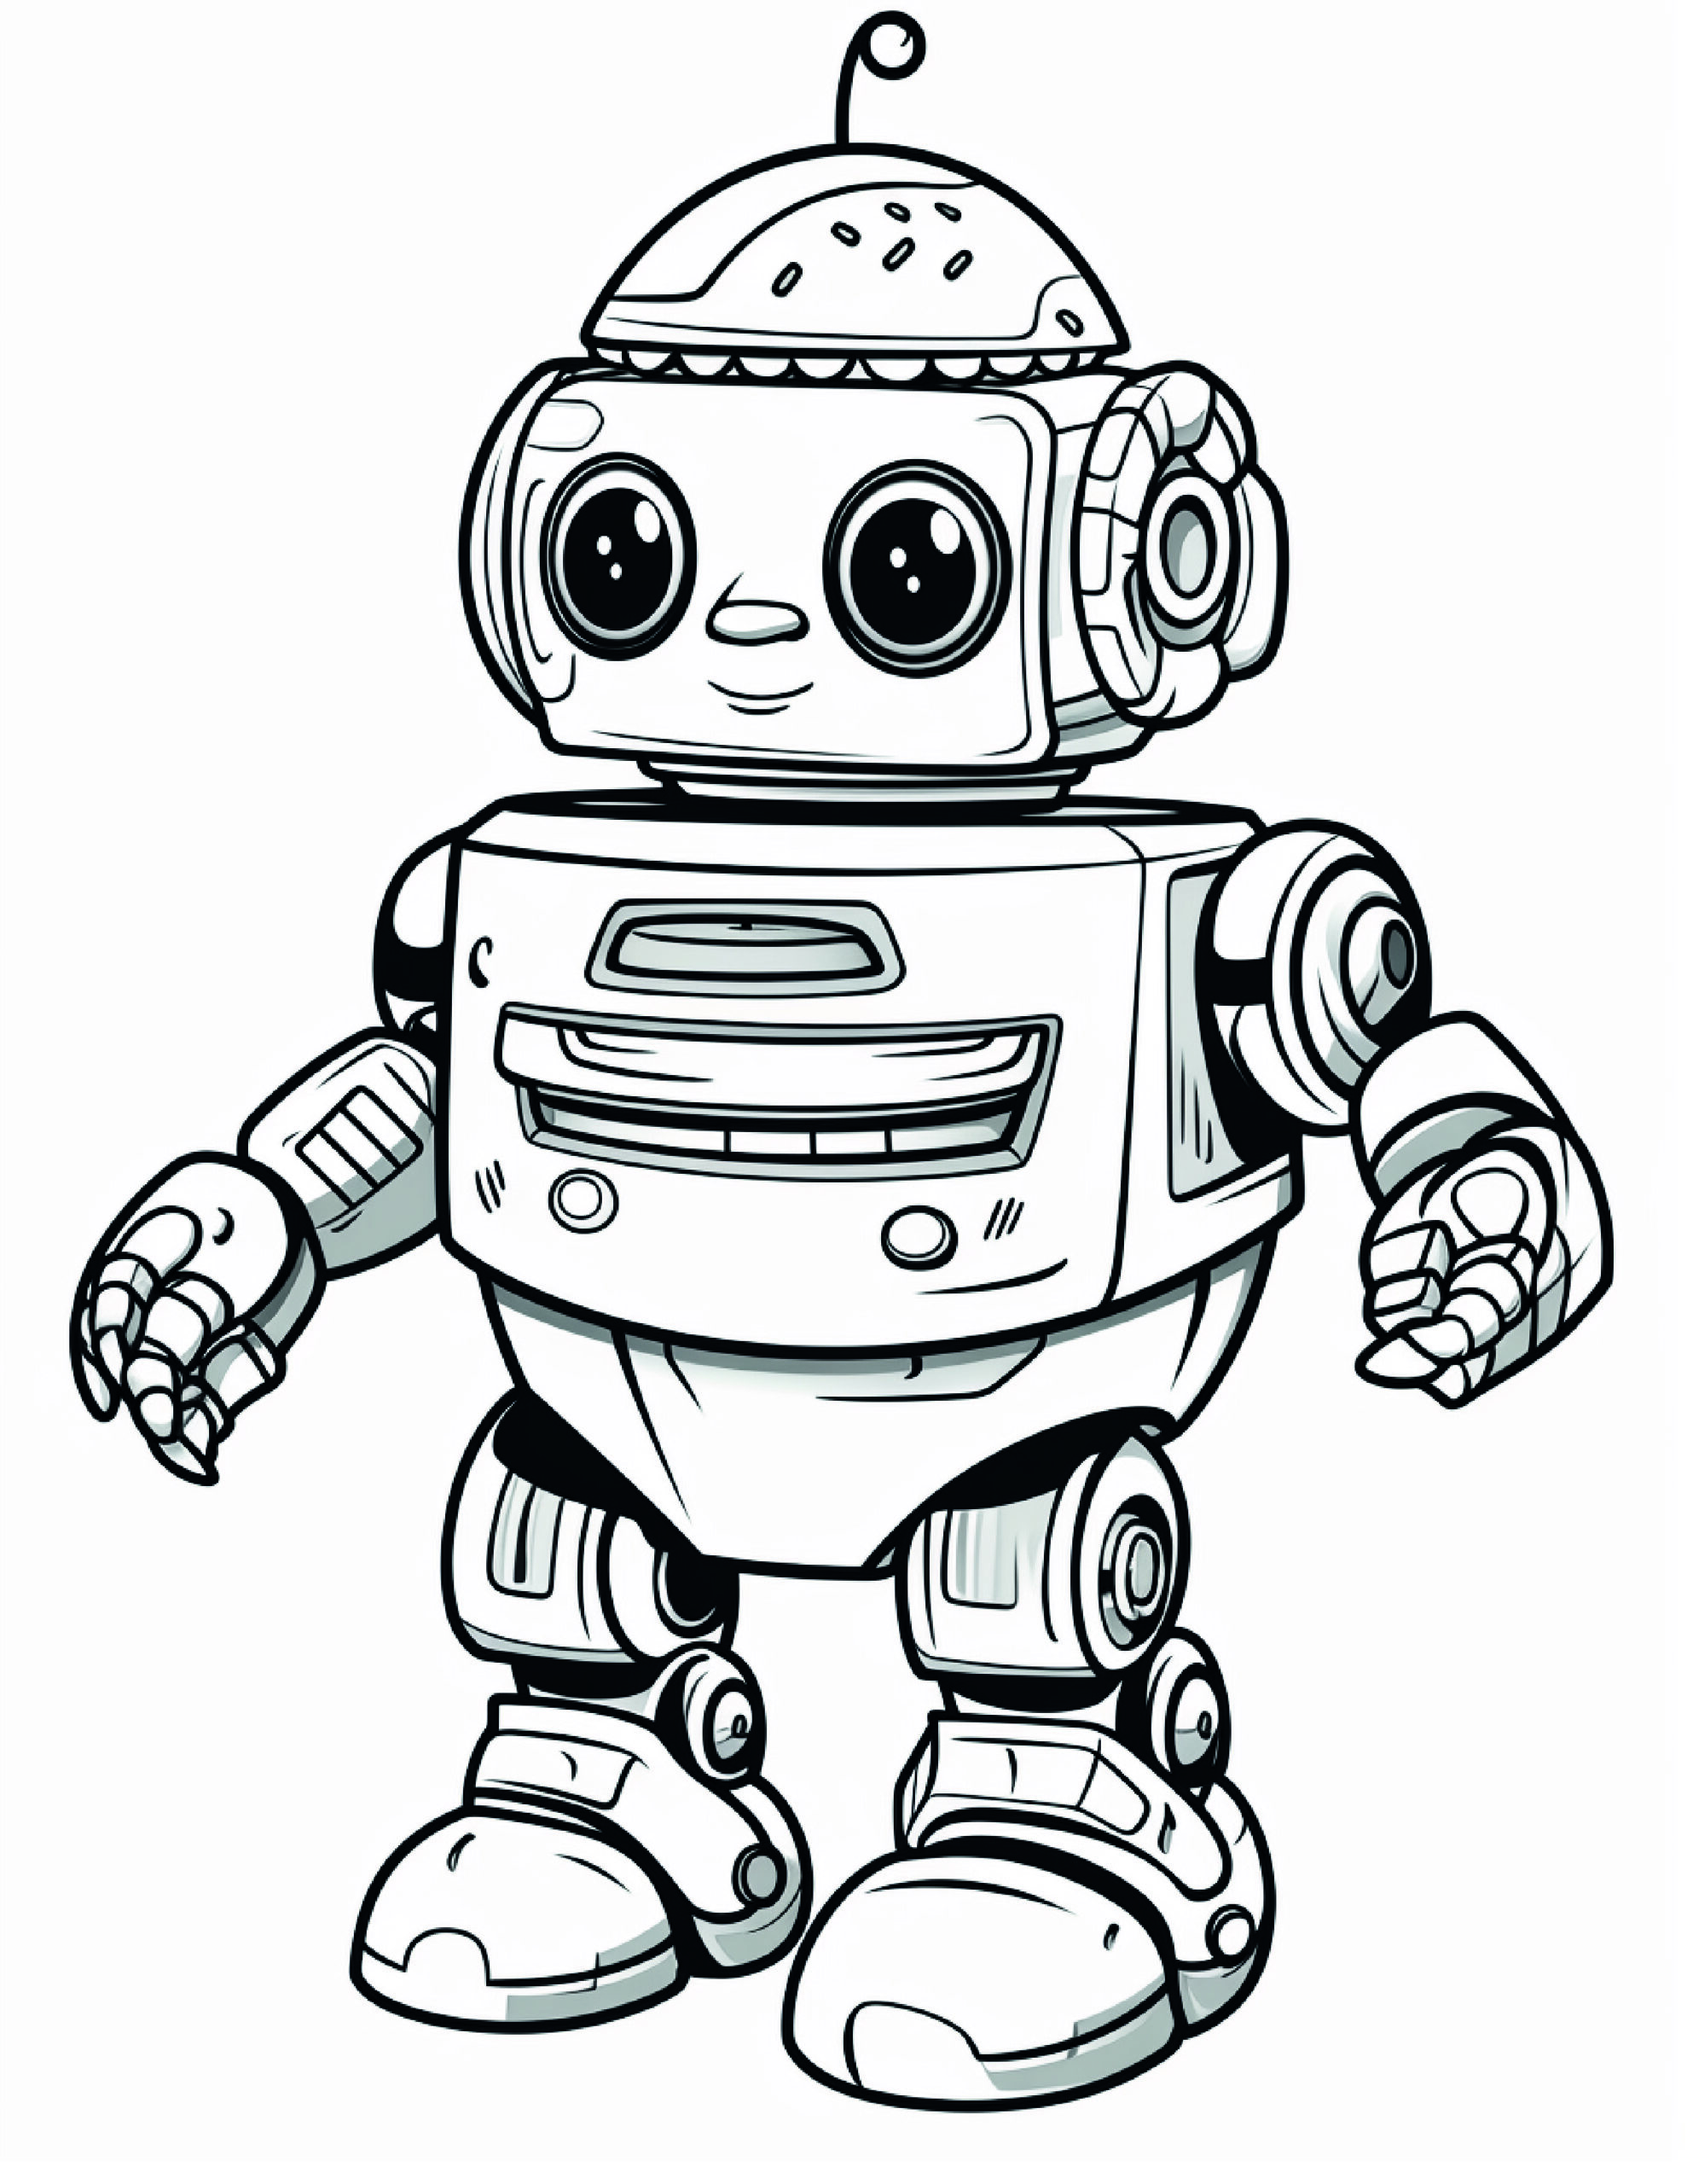 Robot Coloring Page 1 - A line drawing of a cute robot. 